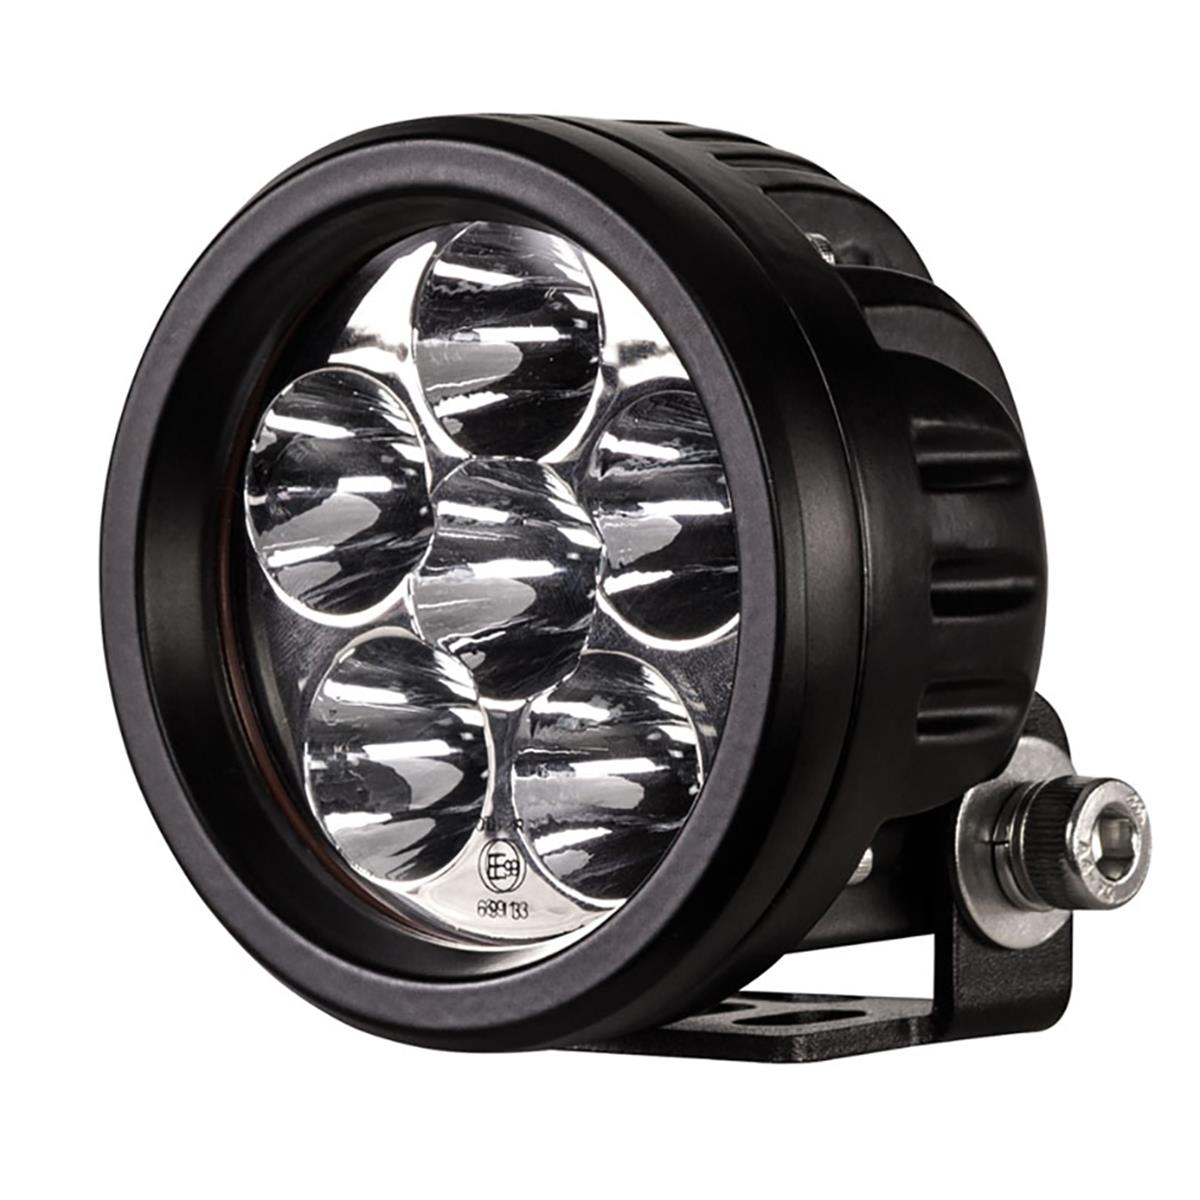 He-dl2 3.5 In. Led Driving Light - Round